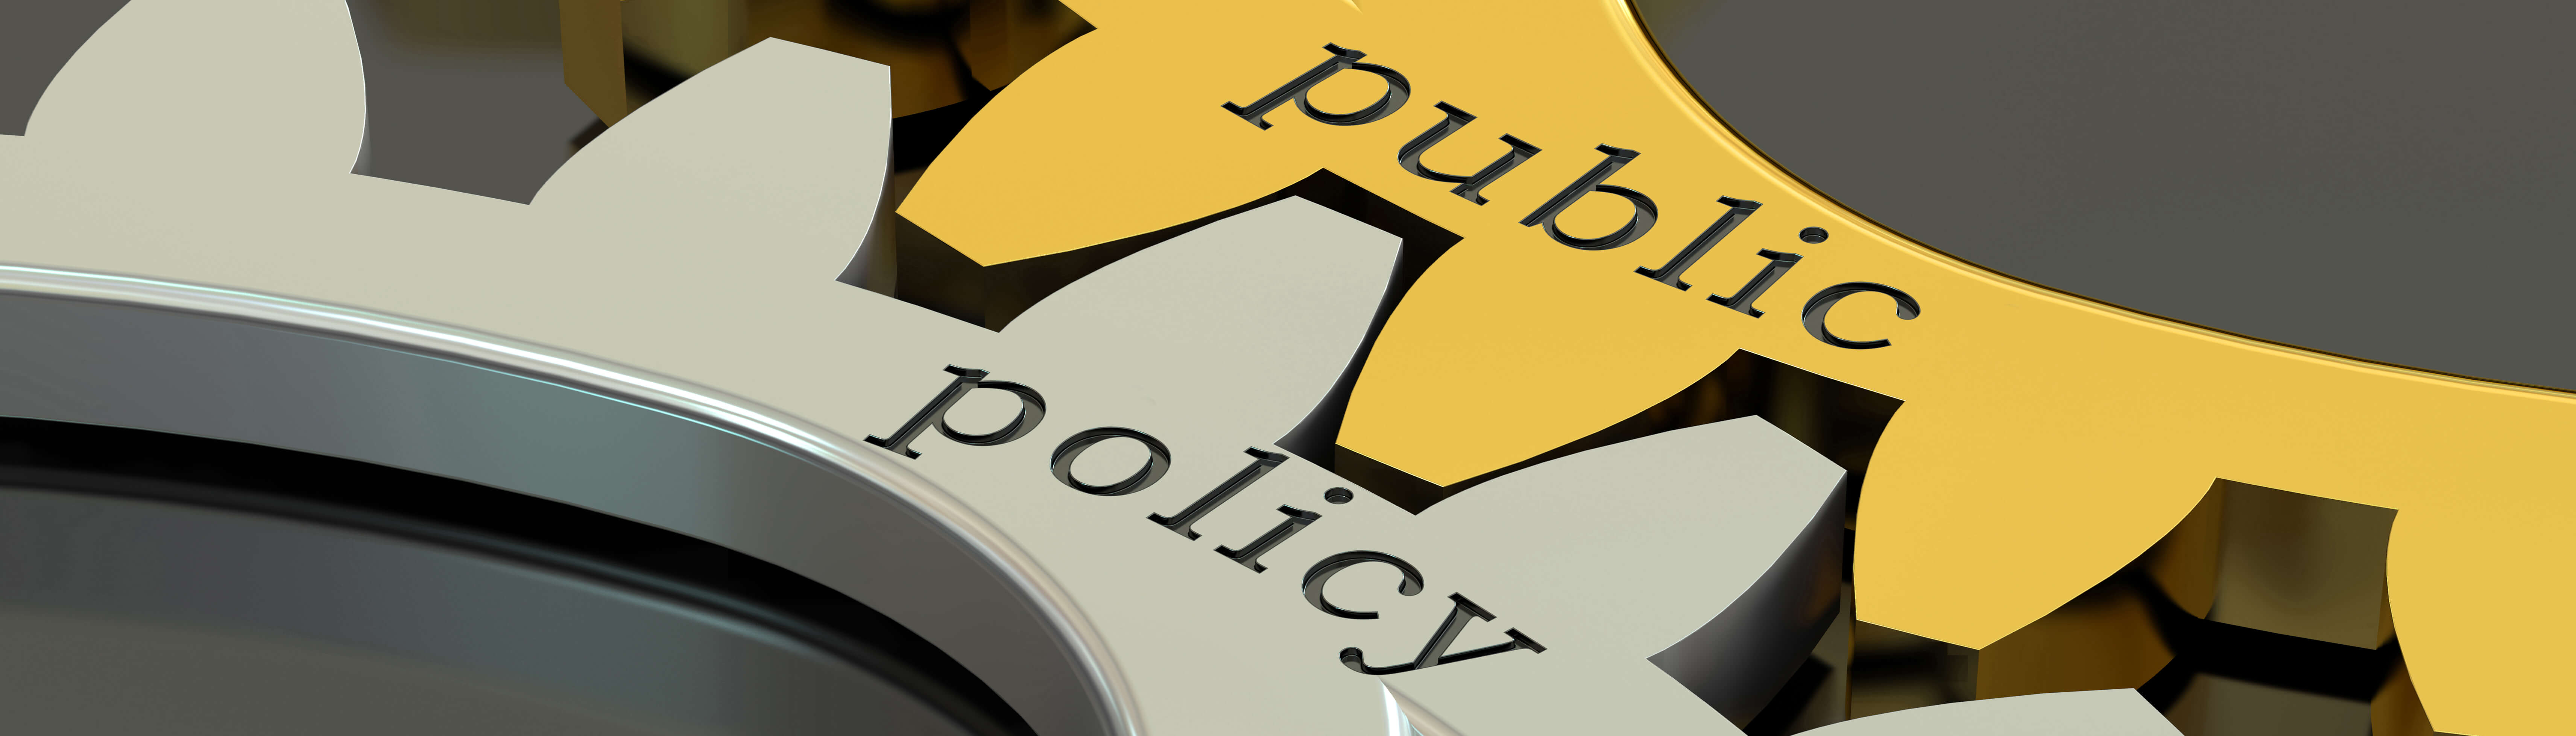 Public Policy Banner